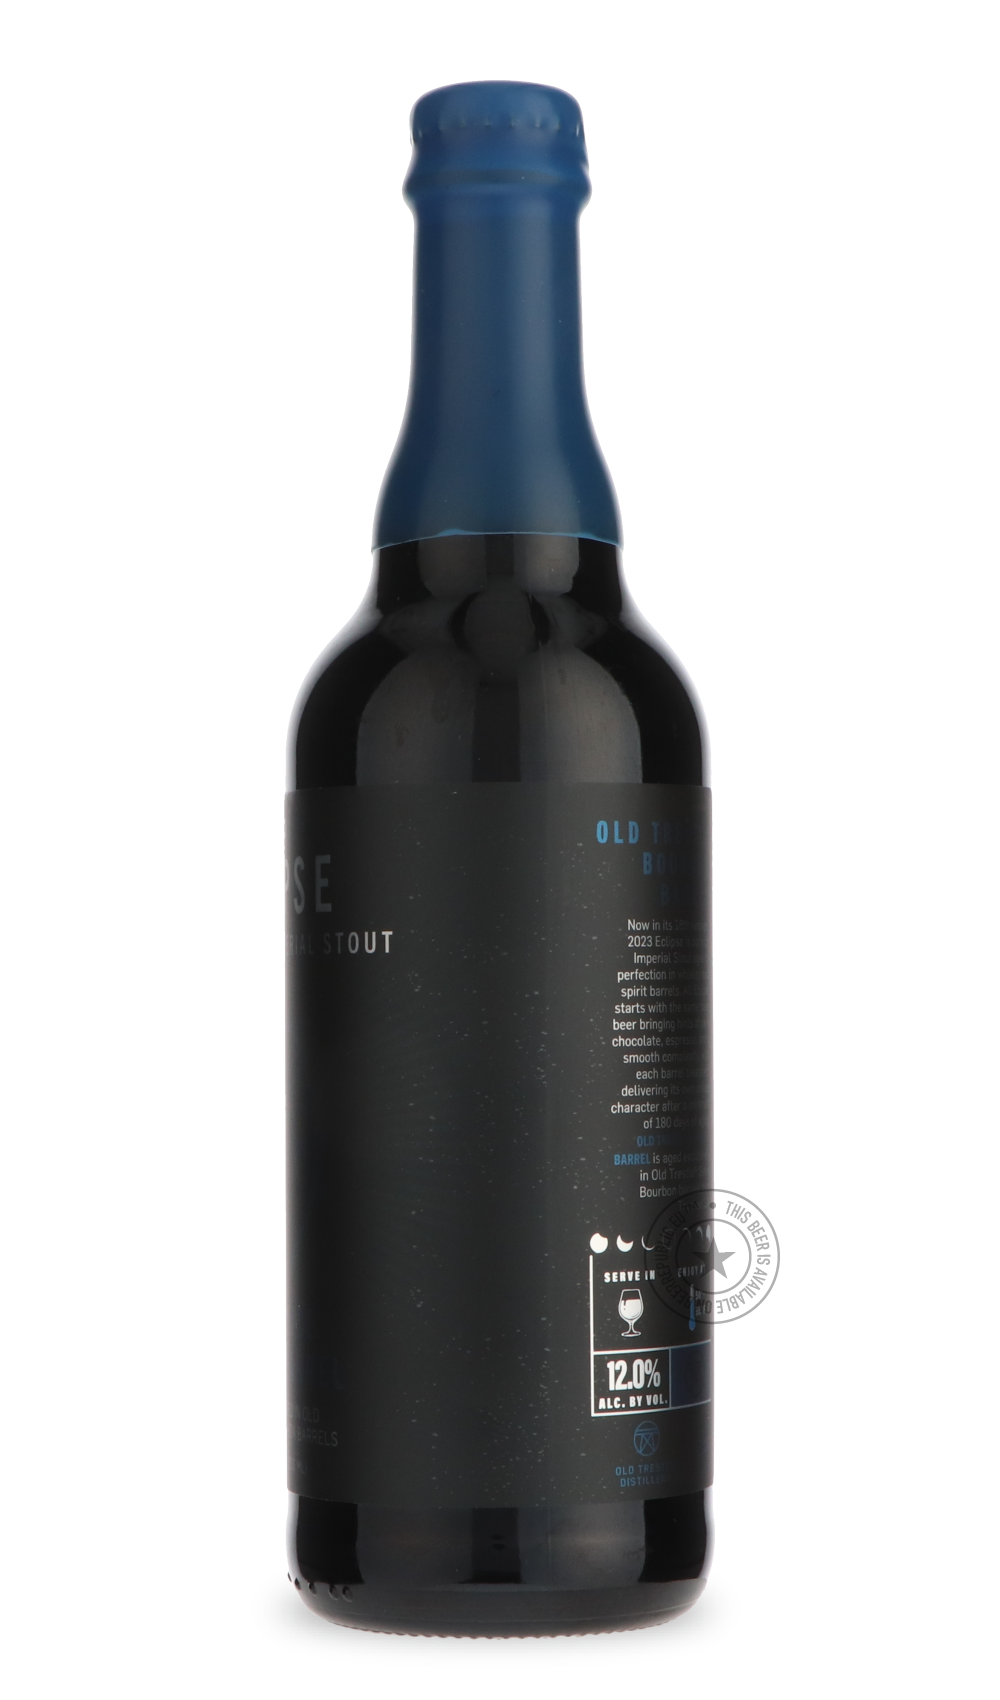 -FiftyFifty- Eclipse - Old Trestle (2023)-Stout & Porter- Only @ Beer Republic - The best online beer store for American & Canadian craft beer - Buy beer online from the USA and Canada - Bier online kopen - Amerikaans bier kopen - Craft beer store - Craft beer kopen - Amerikanisch bier kaufen - Bier online kaufen - Acheter biere online - IPA - Stout - Porter - New England IPA - Hazy IPA - Imperial Stout - Barrel Aged - Barrel Aged Imperial Stout - Brown - Dark beer - Blond - Blonde - Pilsner - Lager - Wheat